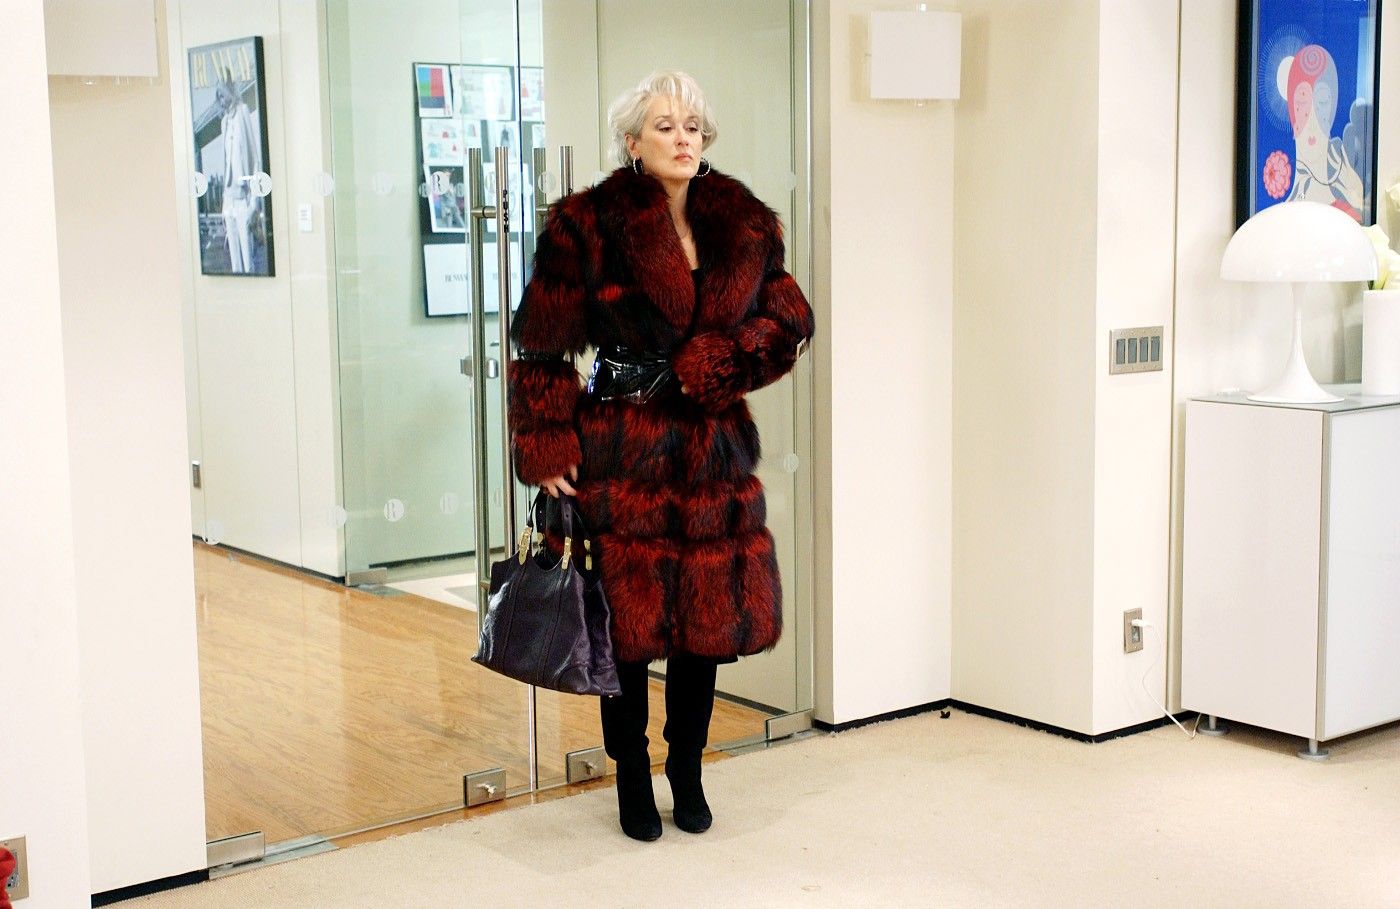 5 Things You Didn't Know About the Costumes from The Devil Wears Prada